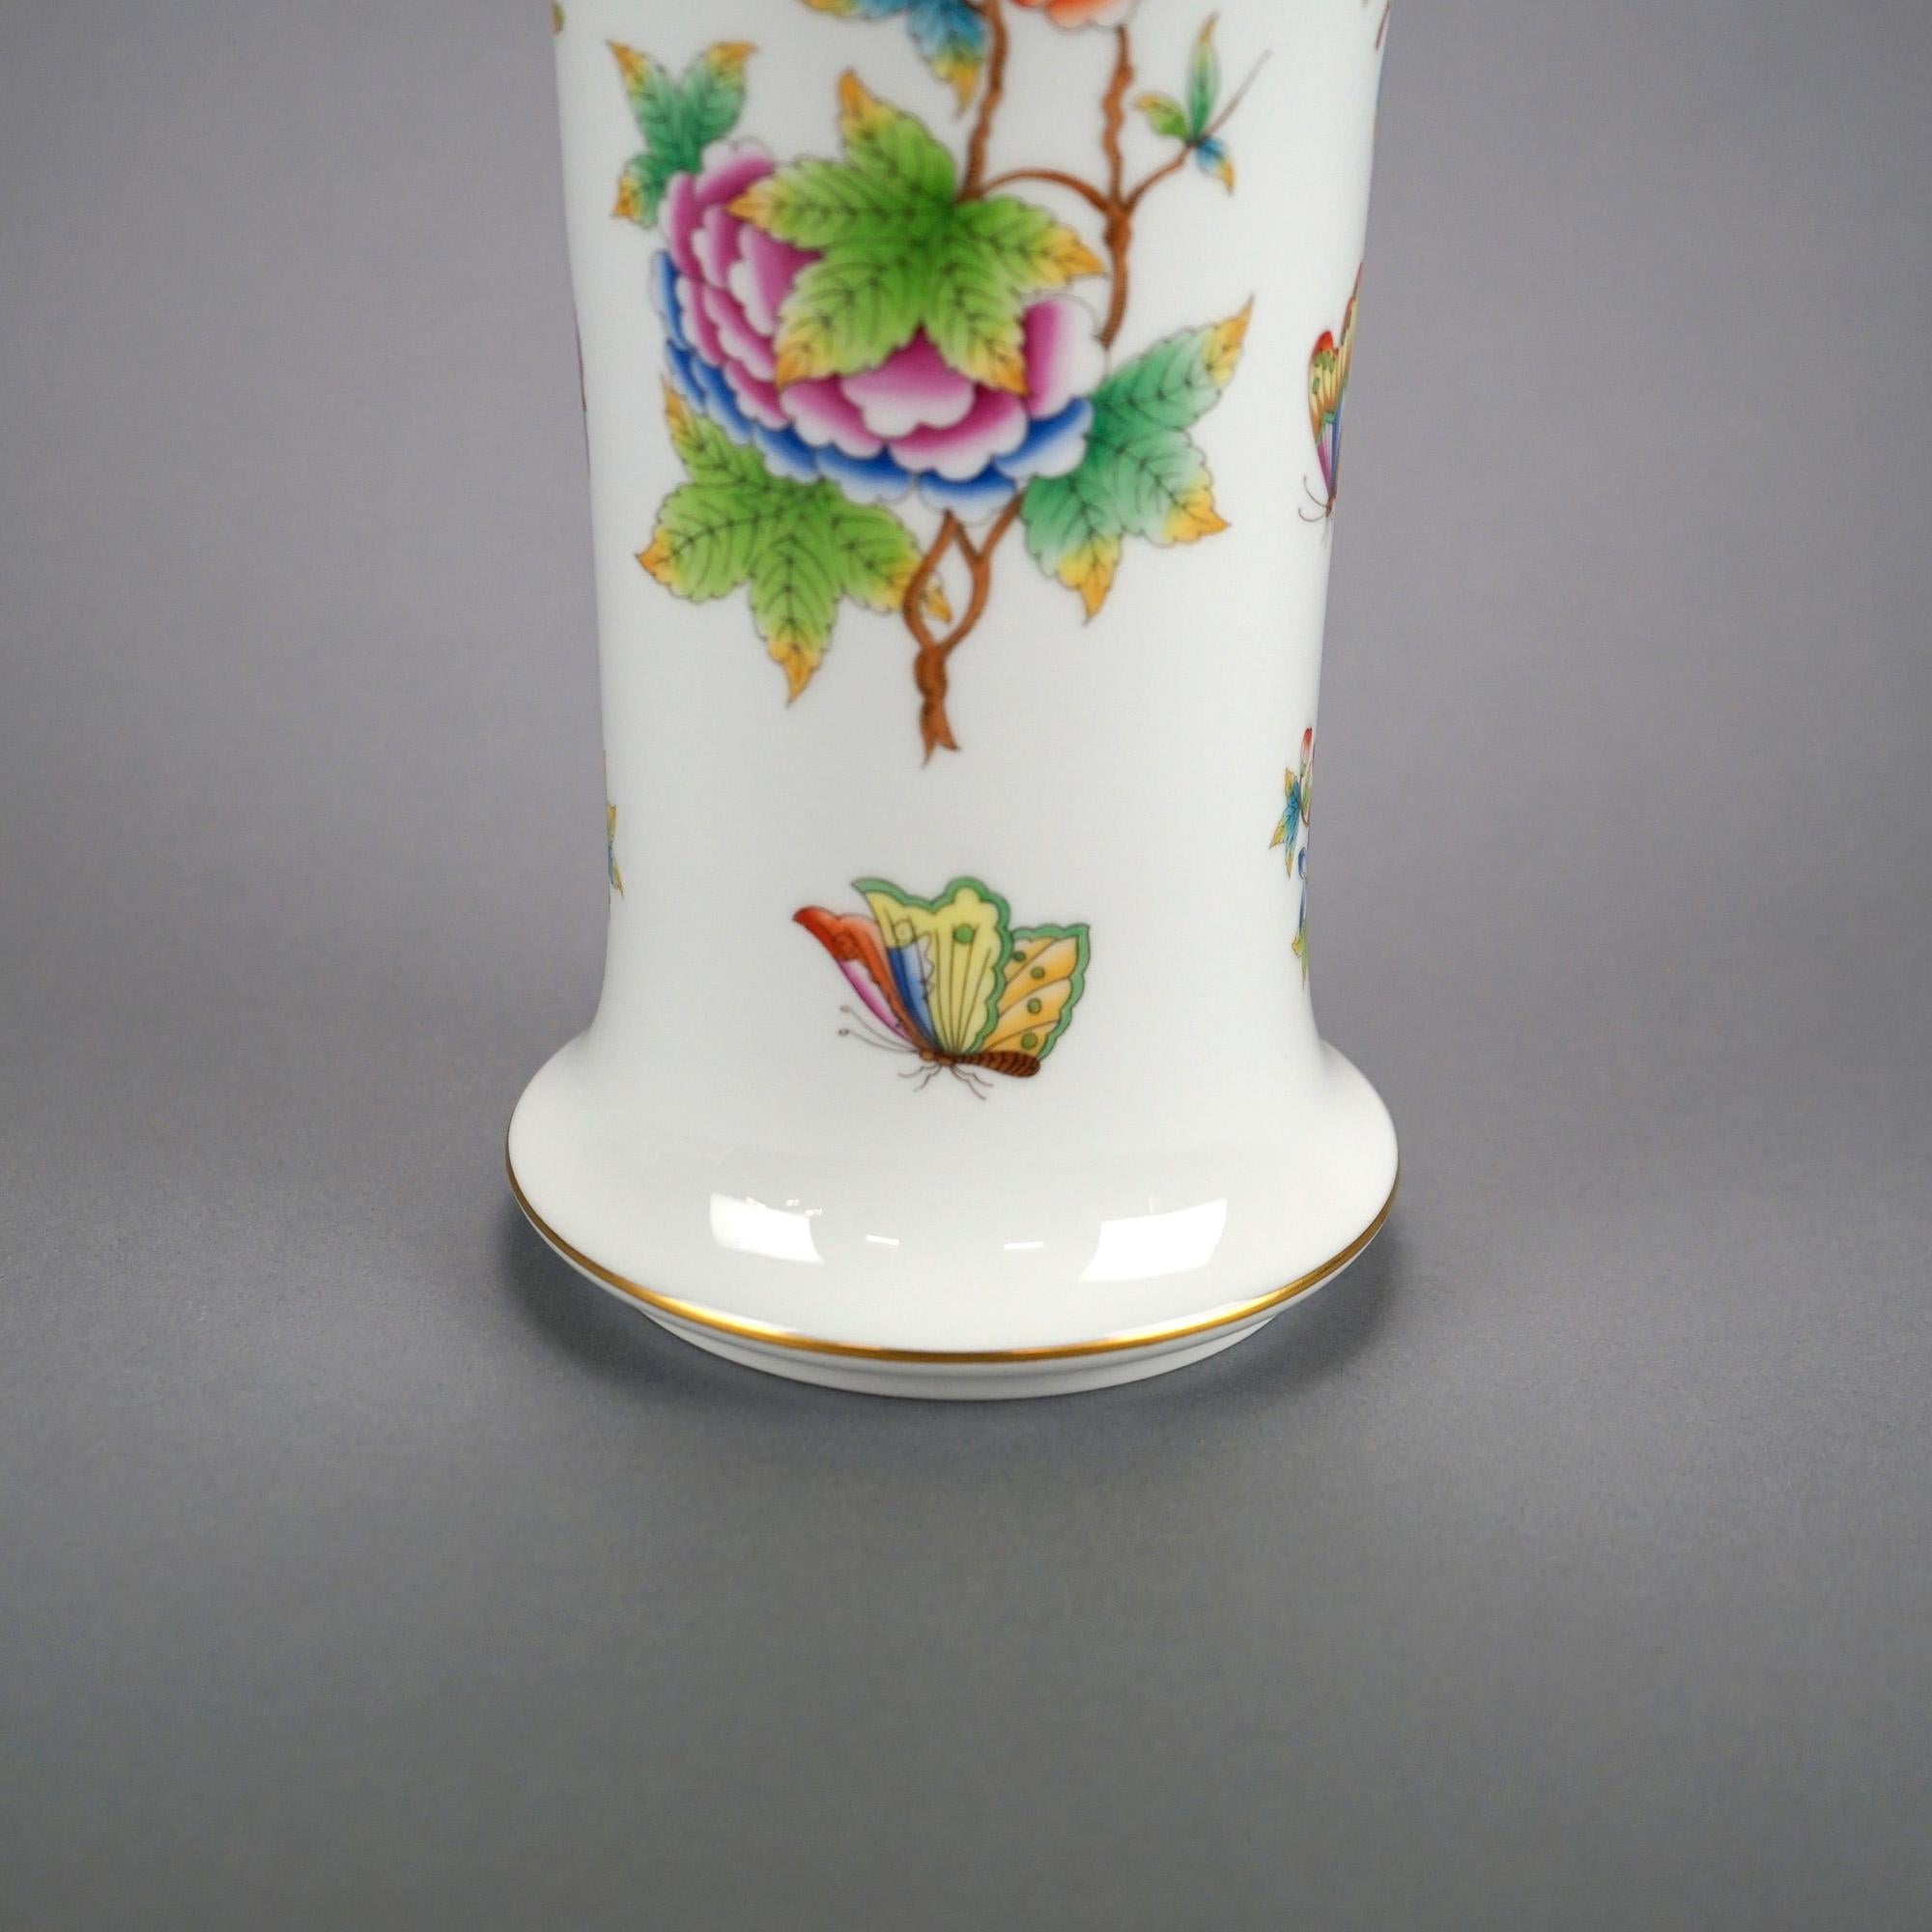 Large Herend Porcelain Decorated Vase, Flower Garden with Butterflies, 20th C 3